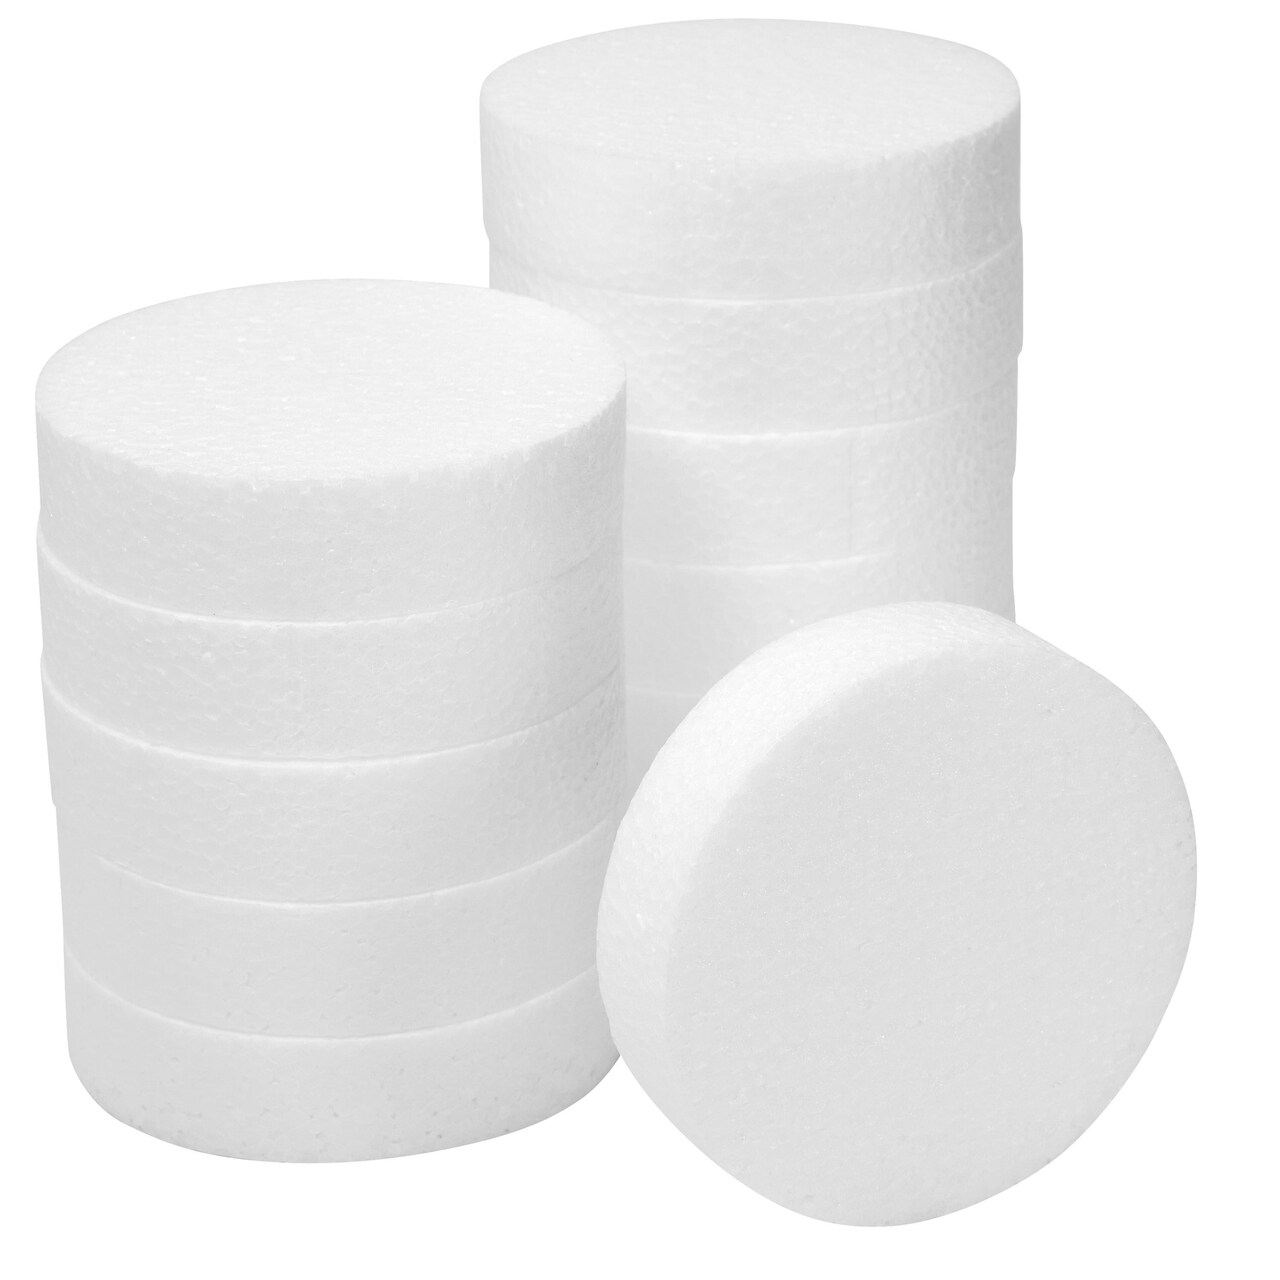 12 Pack Foam Circles for Crafts, Round Polystyrene Discs for DIY Projects  (4 x 4 x 1 In)